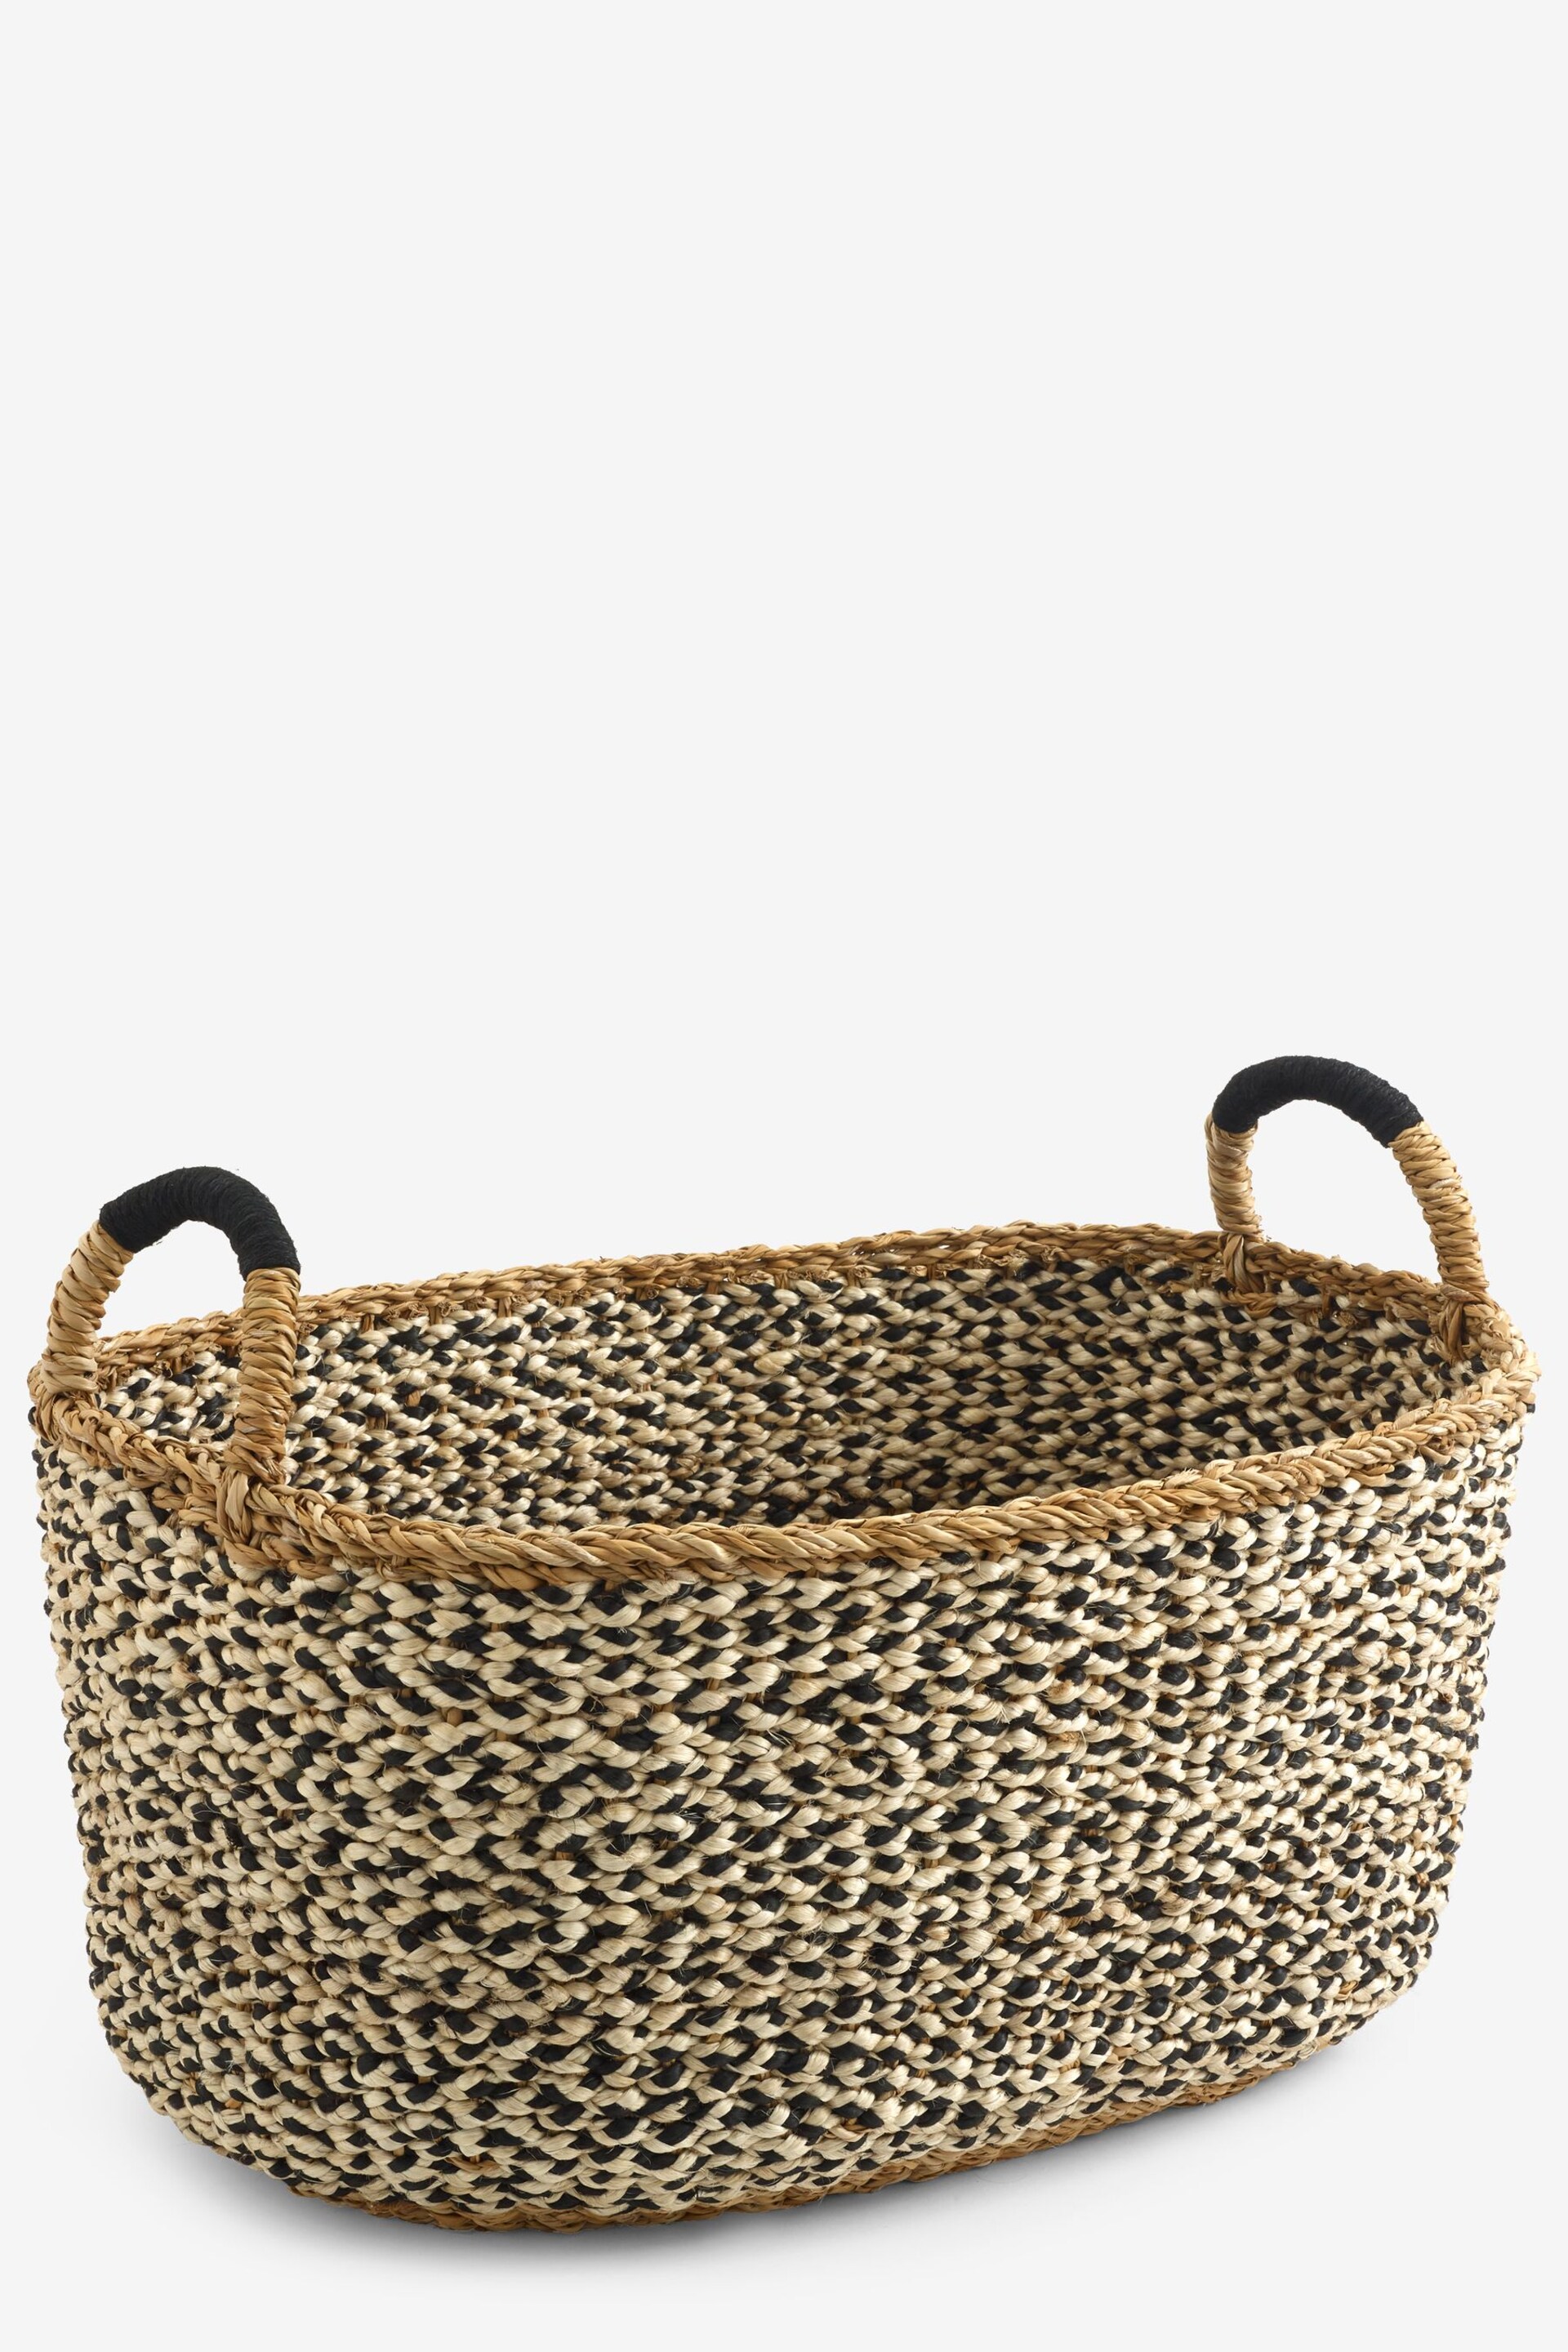 Monochrome Seagrass Bag Laundry Basket - Image 4 of 4